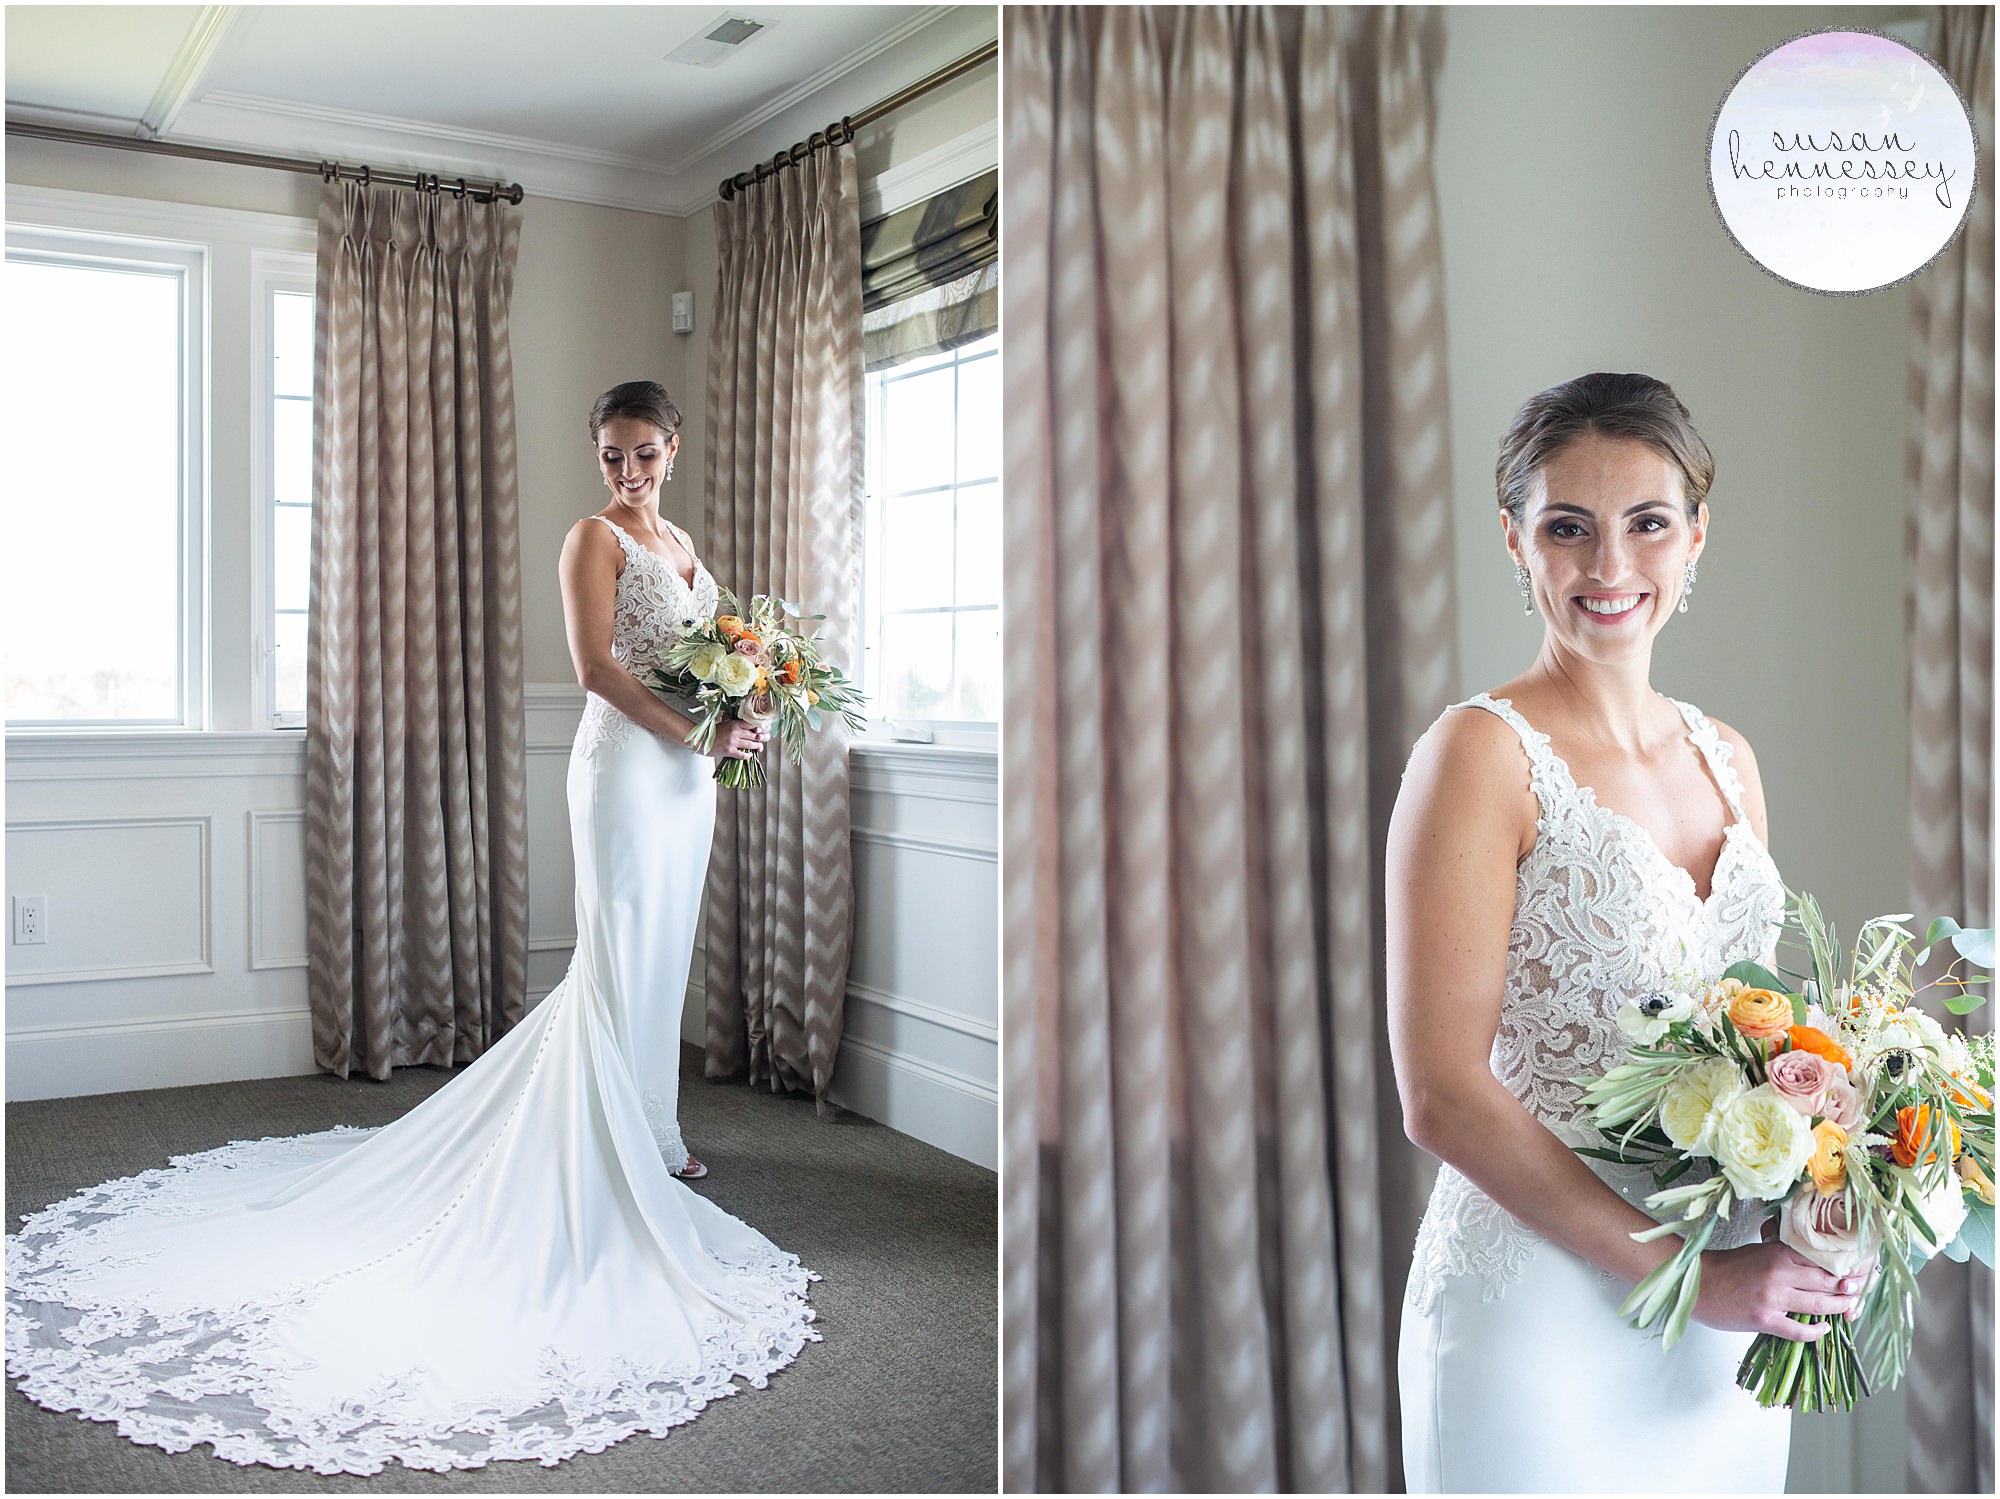 Bridal portraits in the bridal suite at Atlantic City Country Club